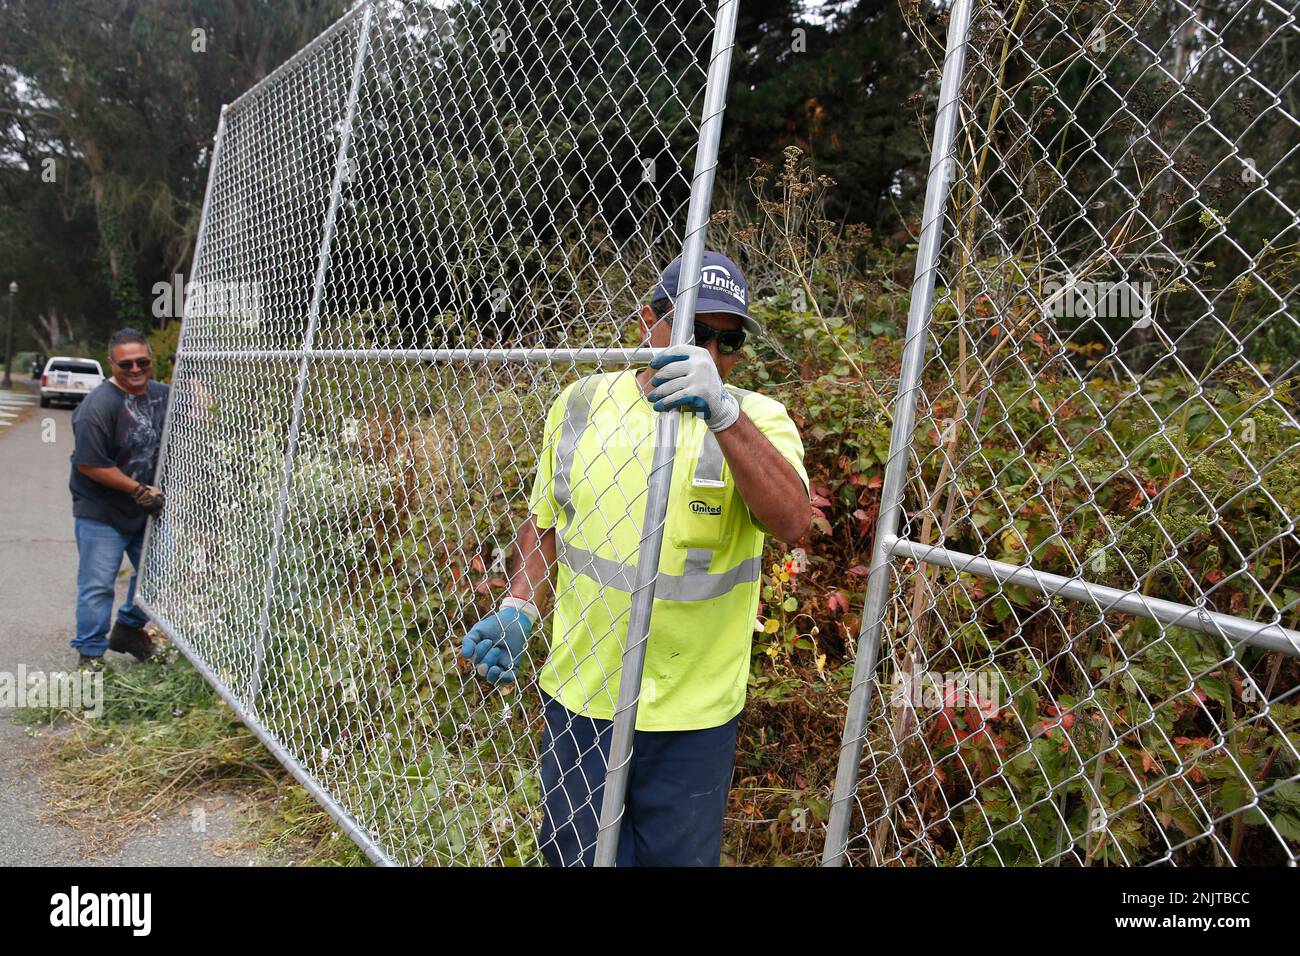 Luis Sul (right), United Site Services fence lead, and Basilio Garcia (left), United Site Services special event service tech, work in Golden Gate Park as they set up fencing for Outside Lands